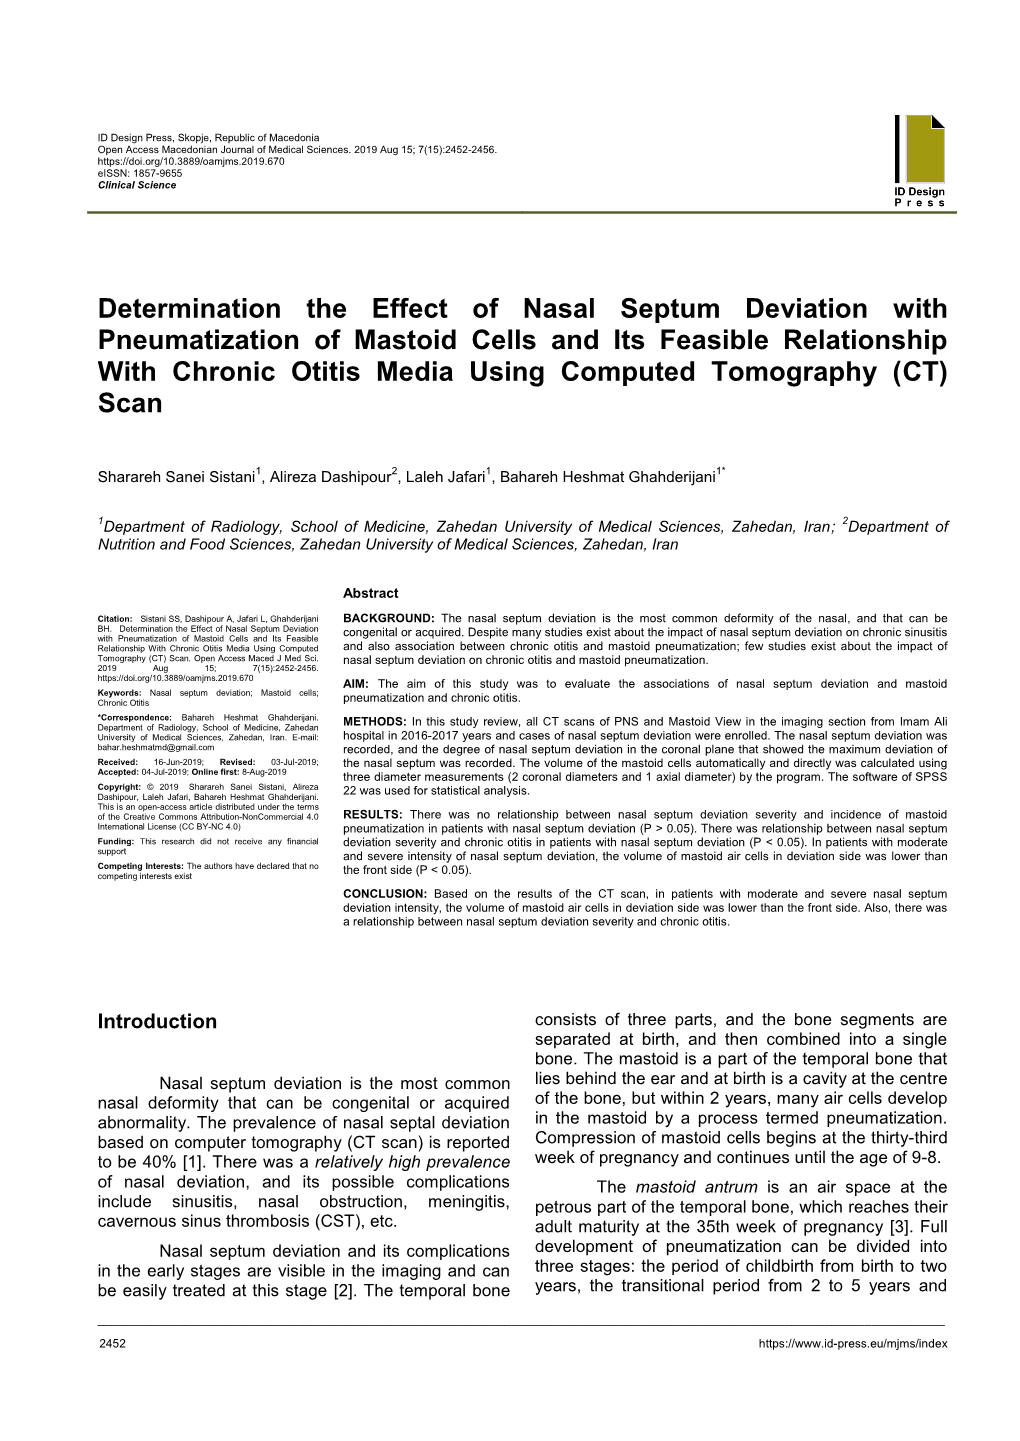 Determination the Effect of Nasal Septum Deviation With